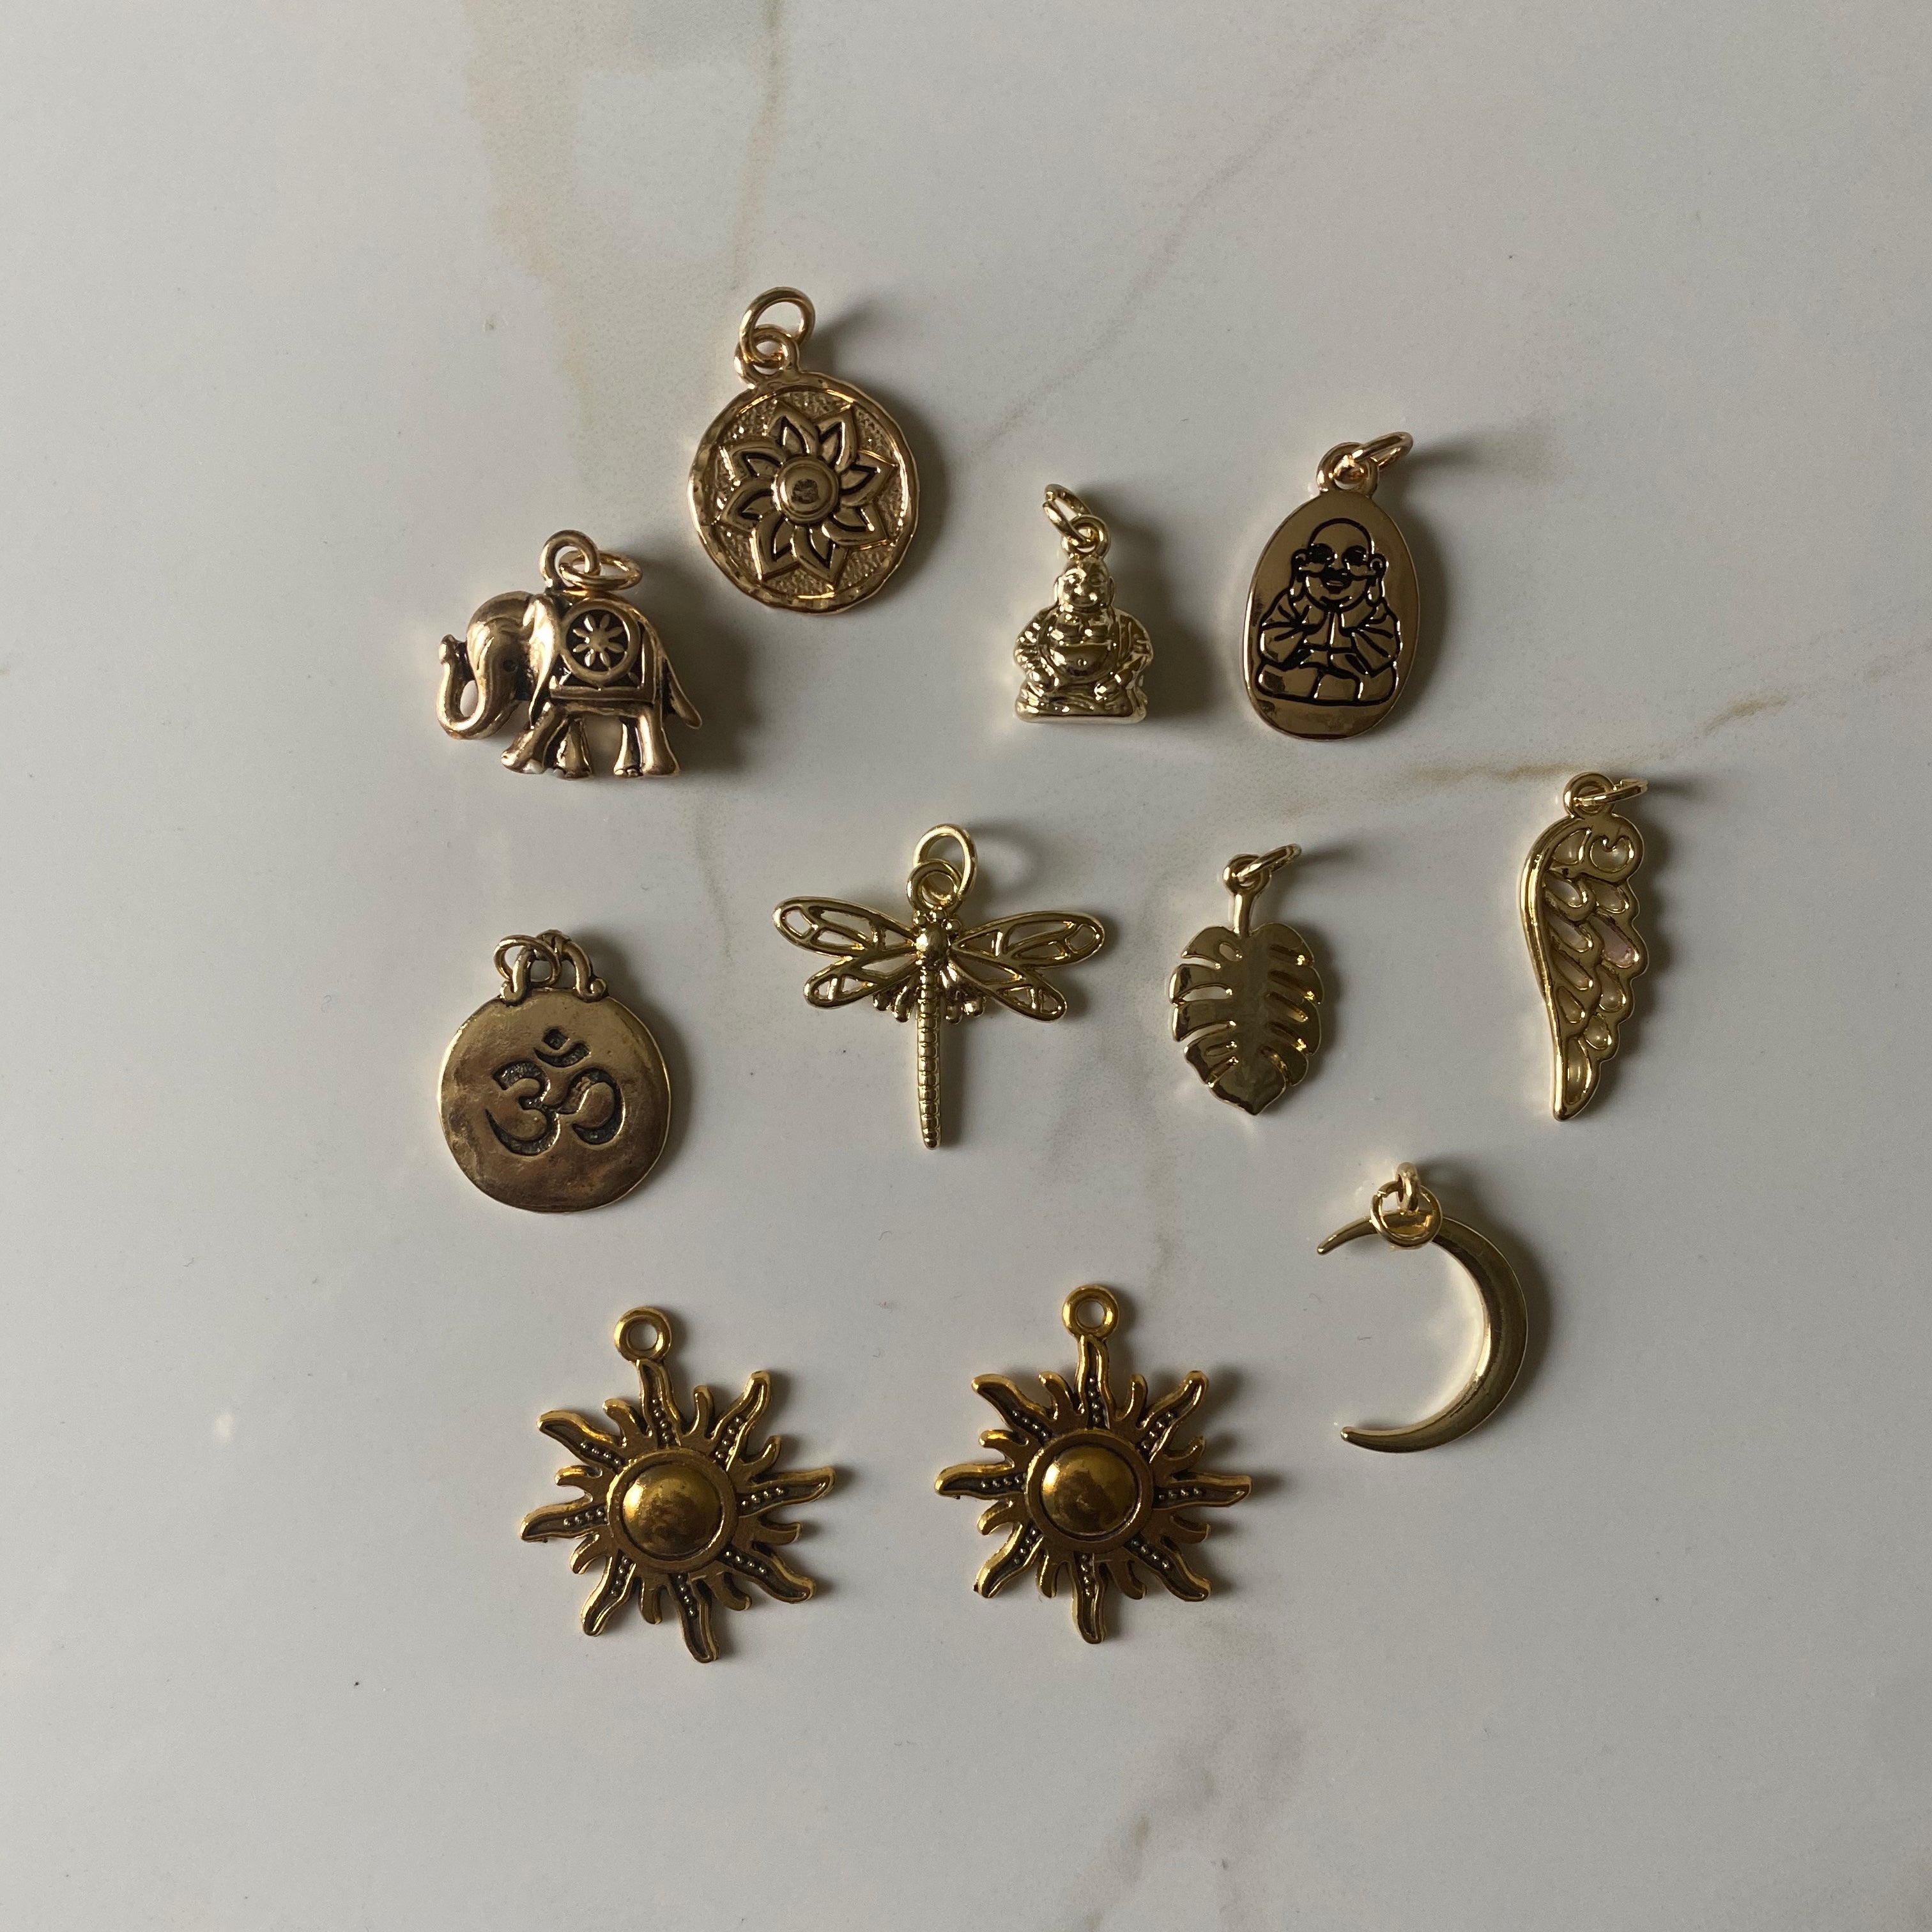 Gold Filled Charms – Makeda's Crystals